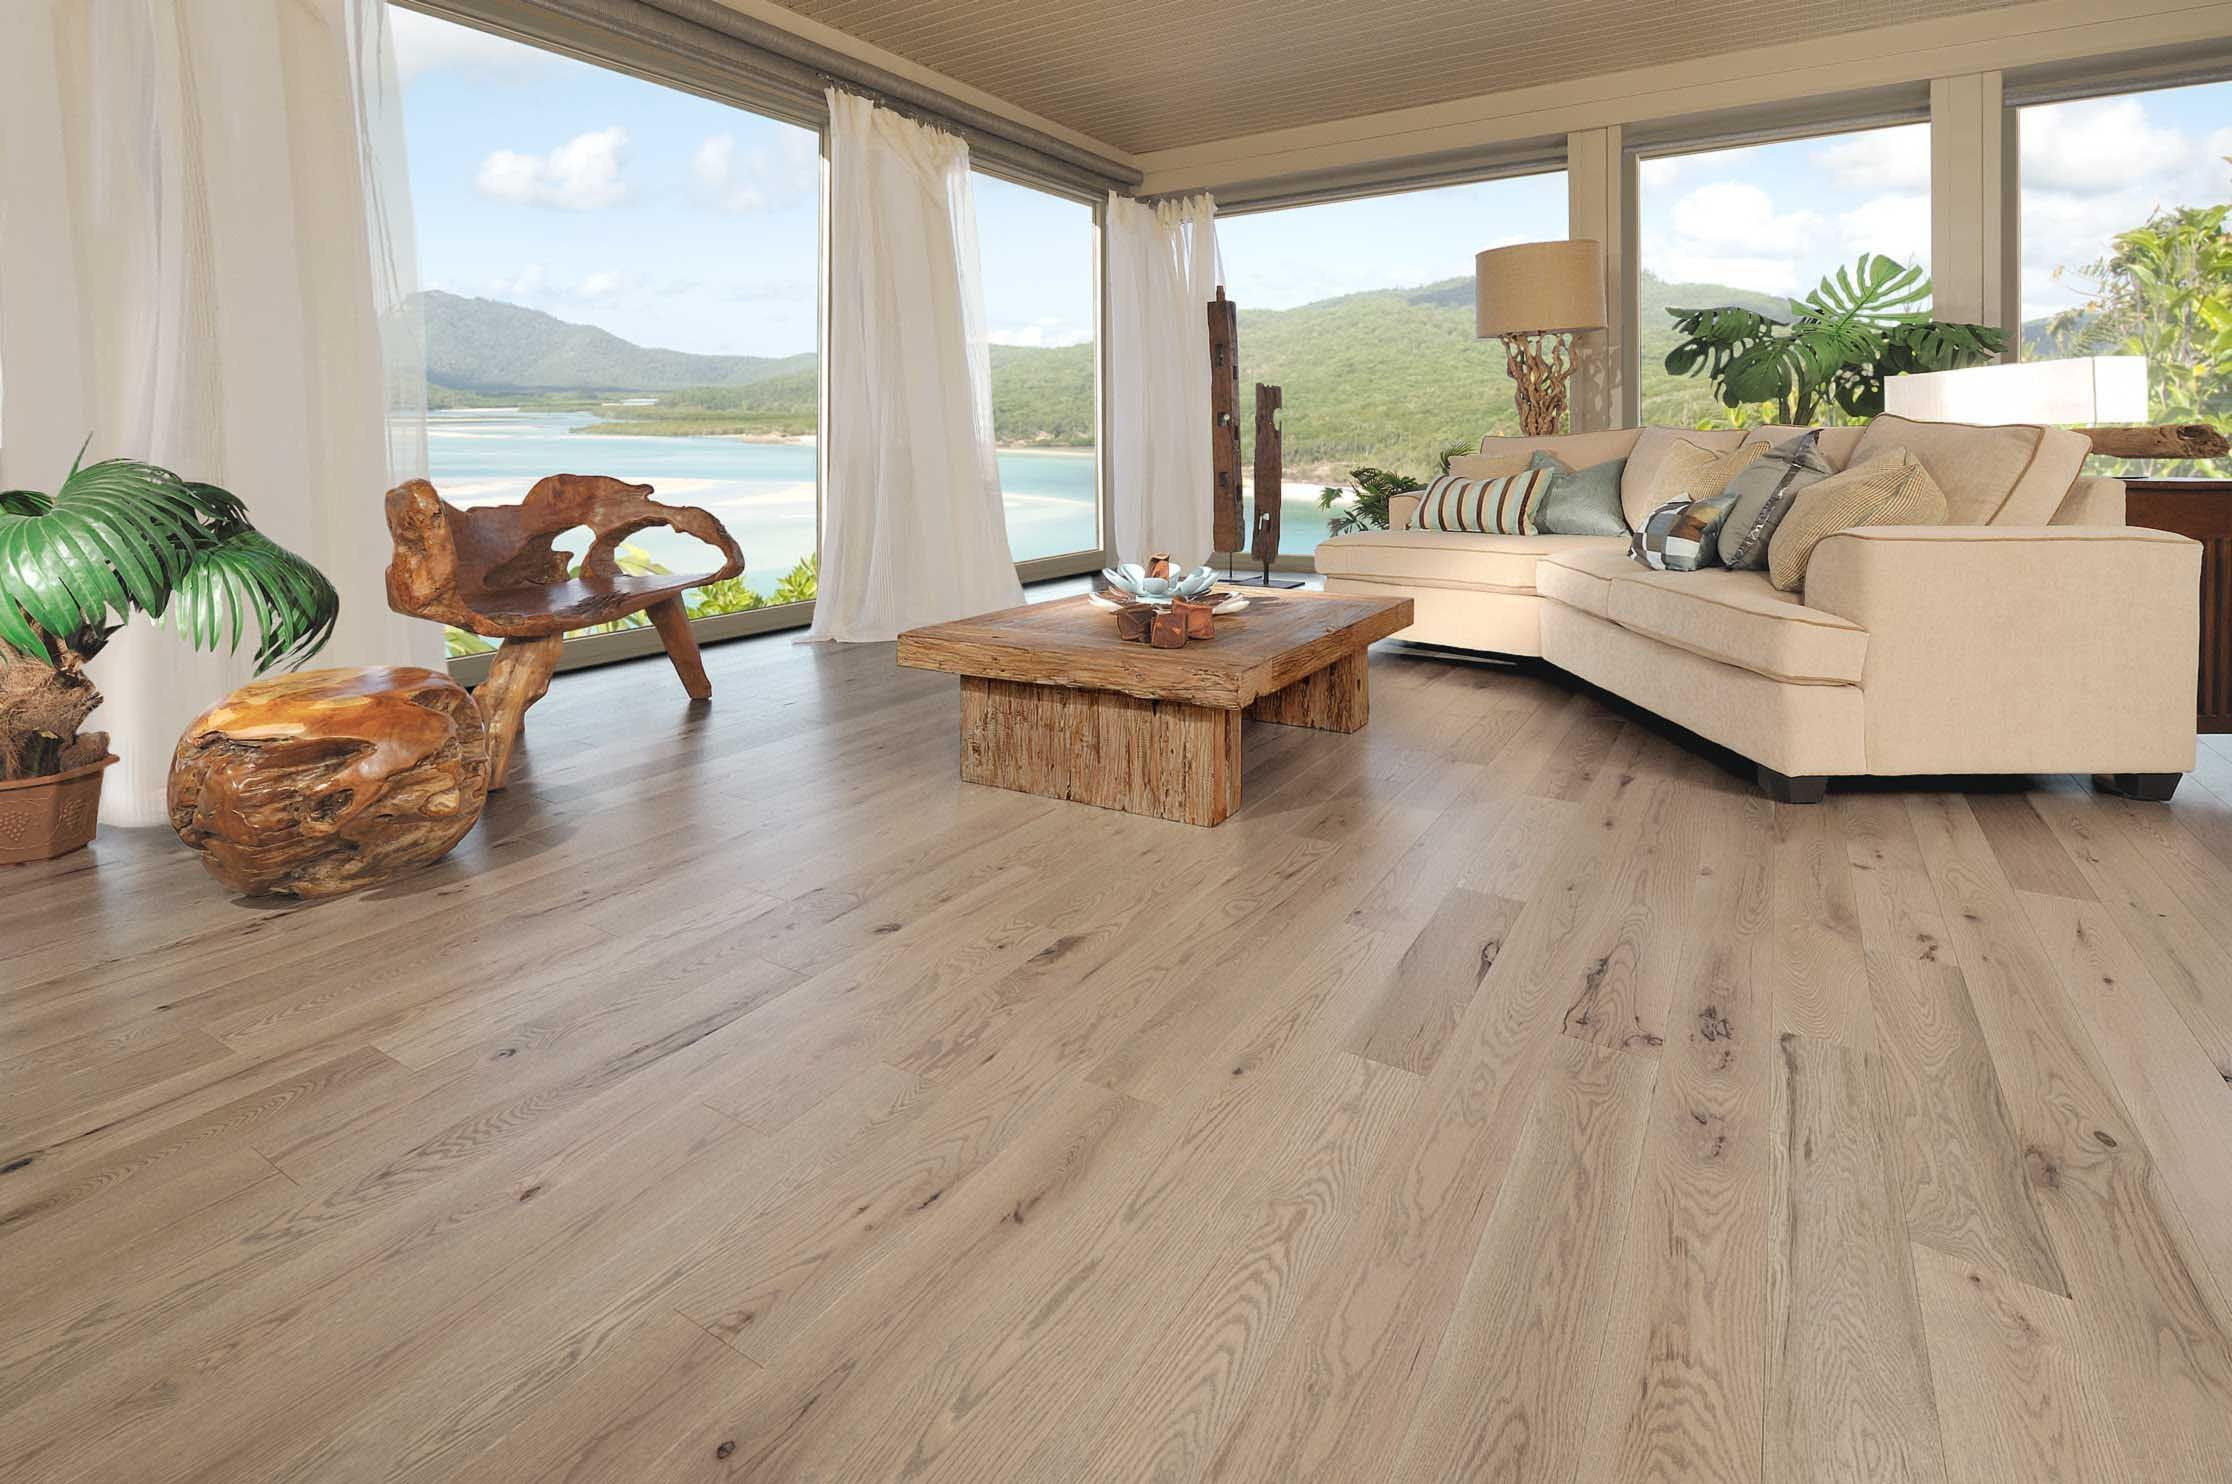 bruce hardwood floor underlayment of a refined dacor of serene elegance do you yearn for light filled for a refined dacor of serene elegance do you yearn for light filled zen inspired places discover cha¢teau divine when paired with soft colors inspired by the